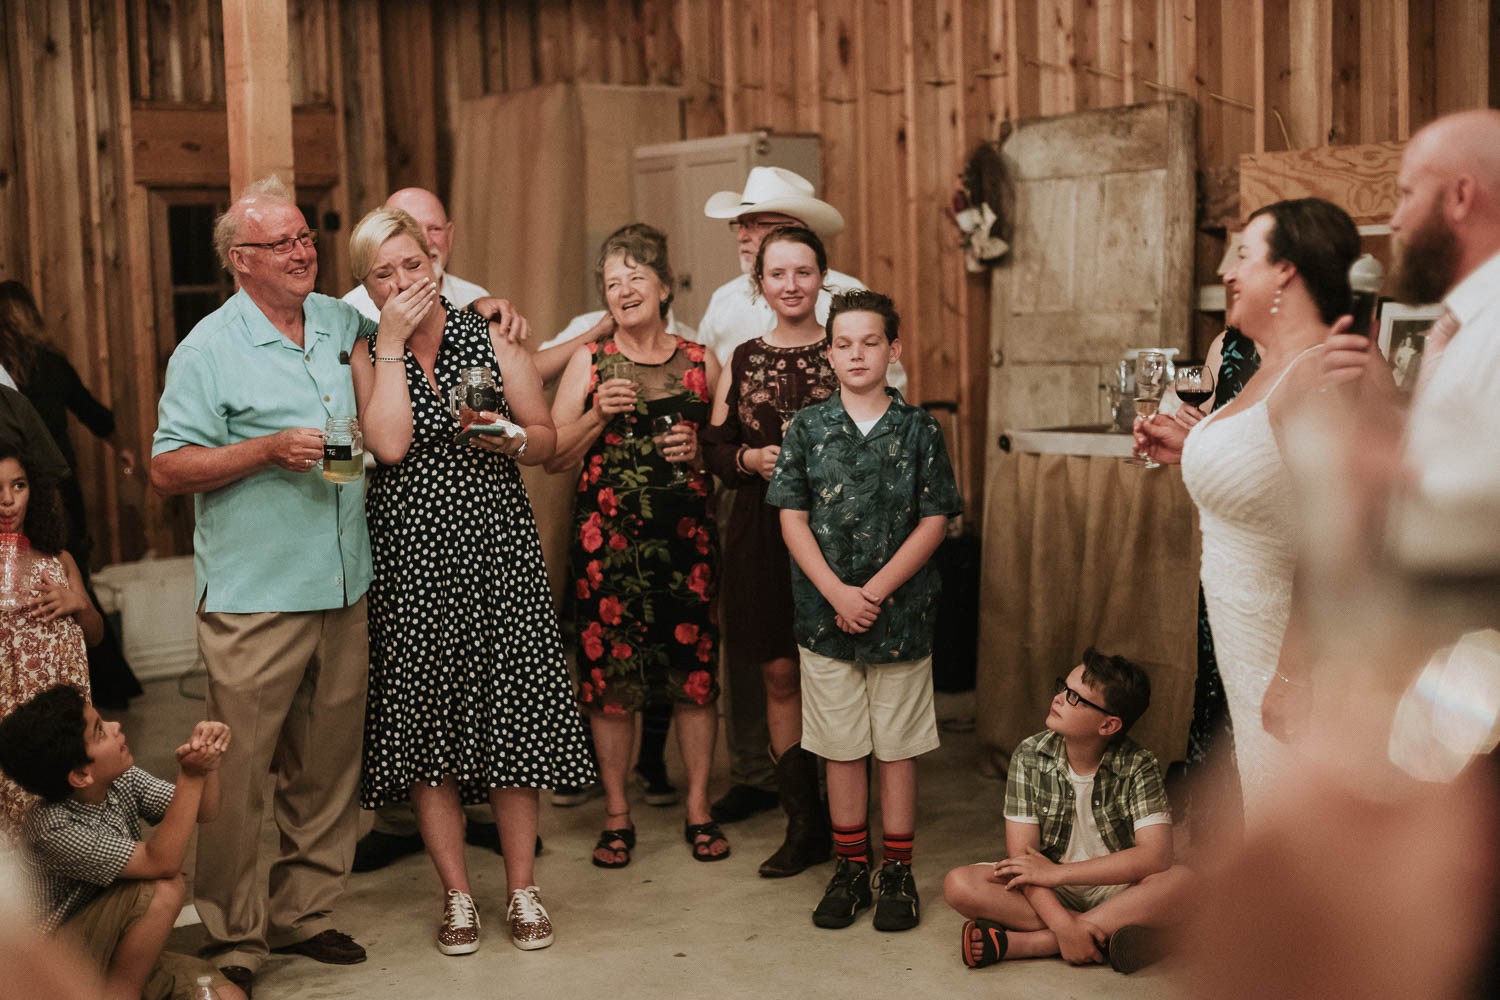 Emotional evening for owners of the ranch. They were so kind to allow the couple to marry on their ranch, Bulverde, Texas